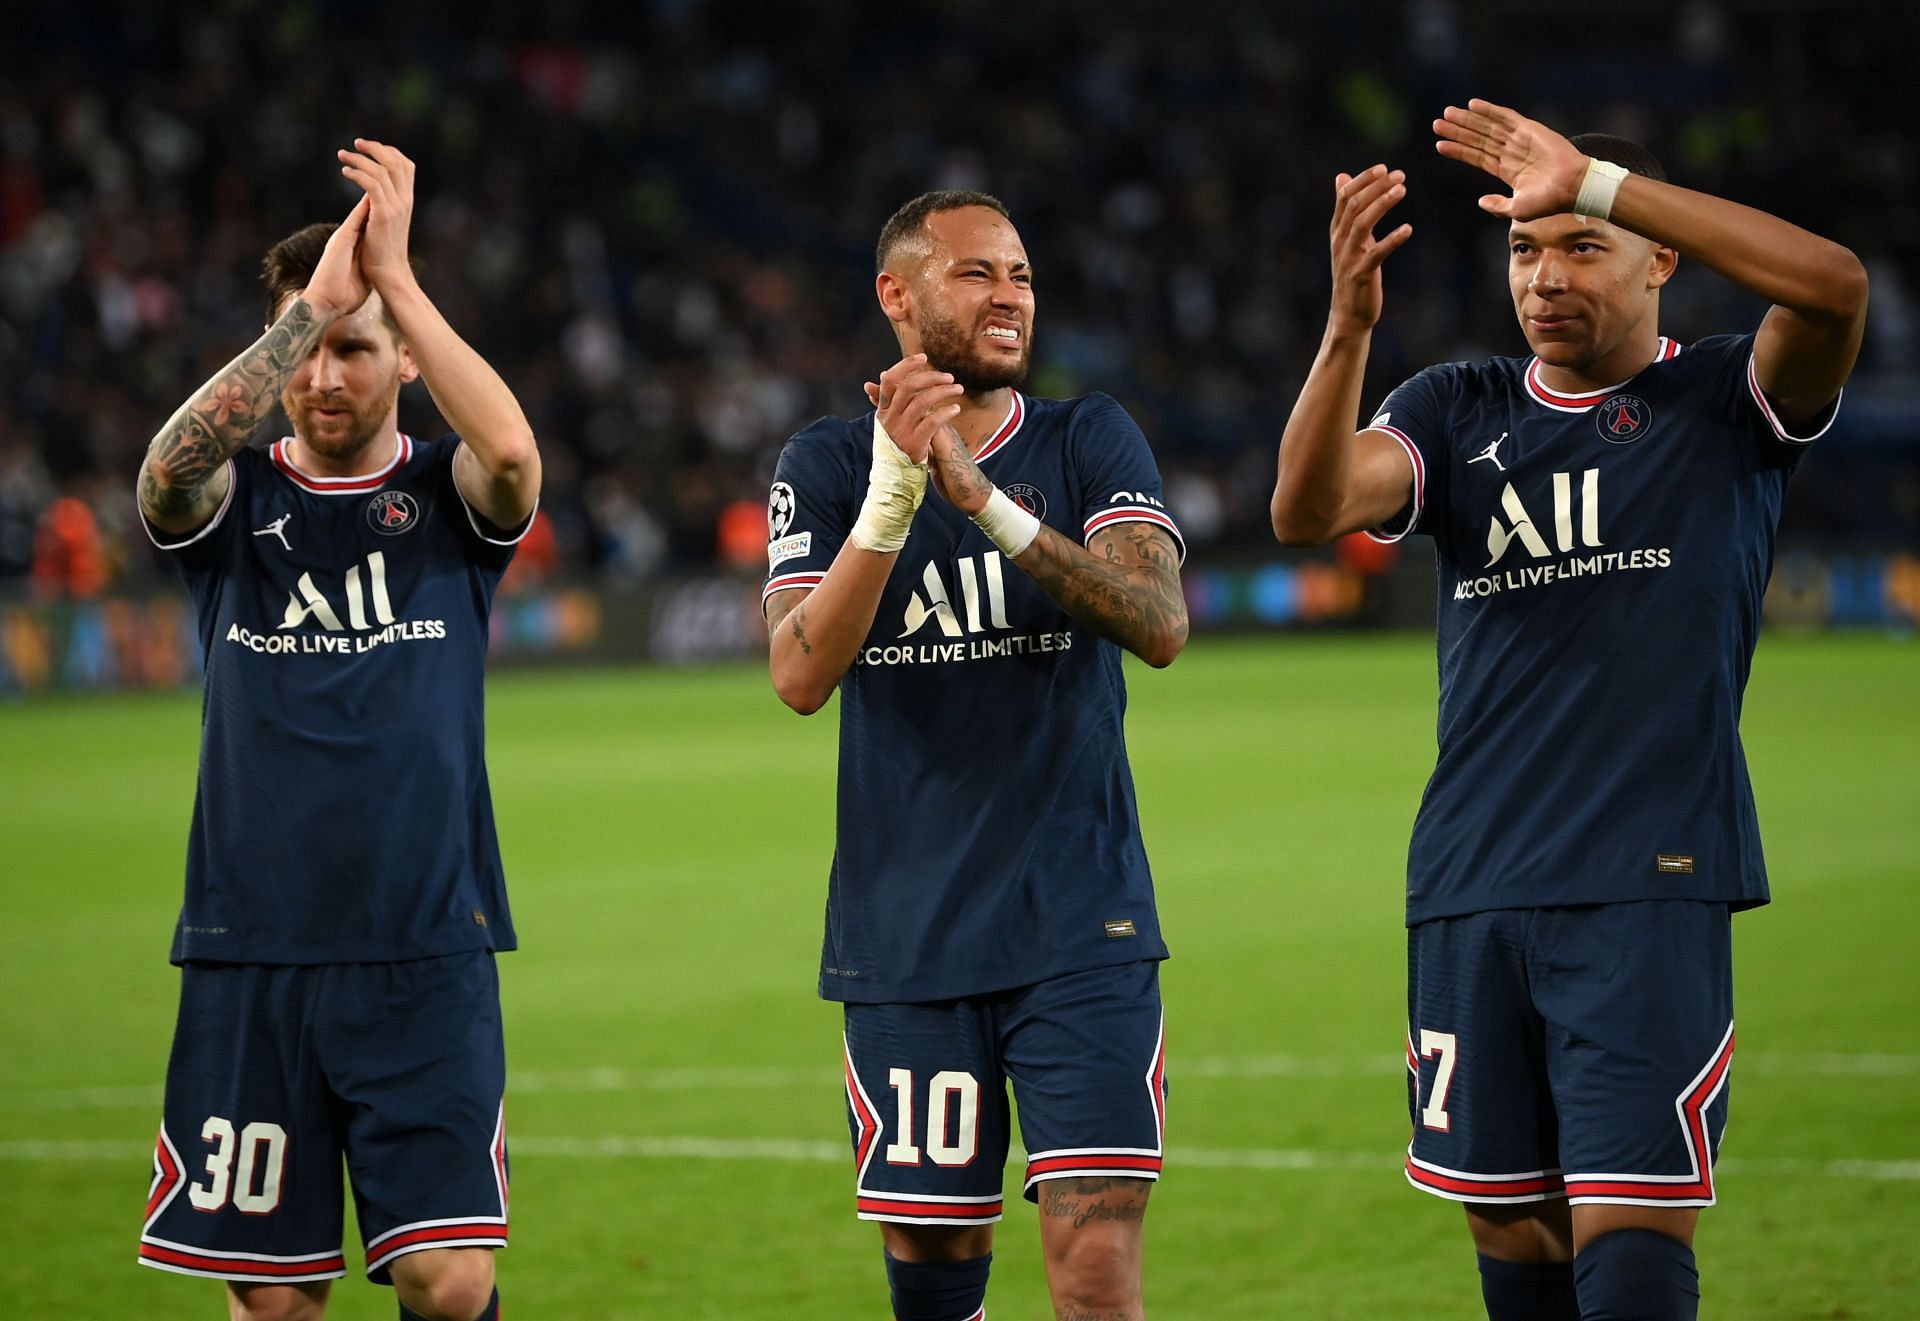 The PSG trio are enjoying a decent start to the new season